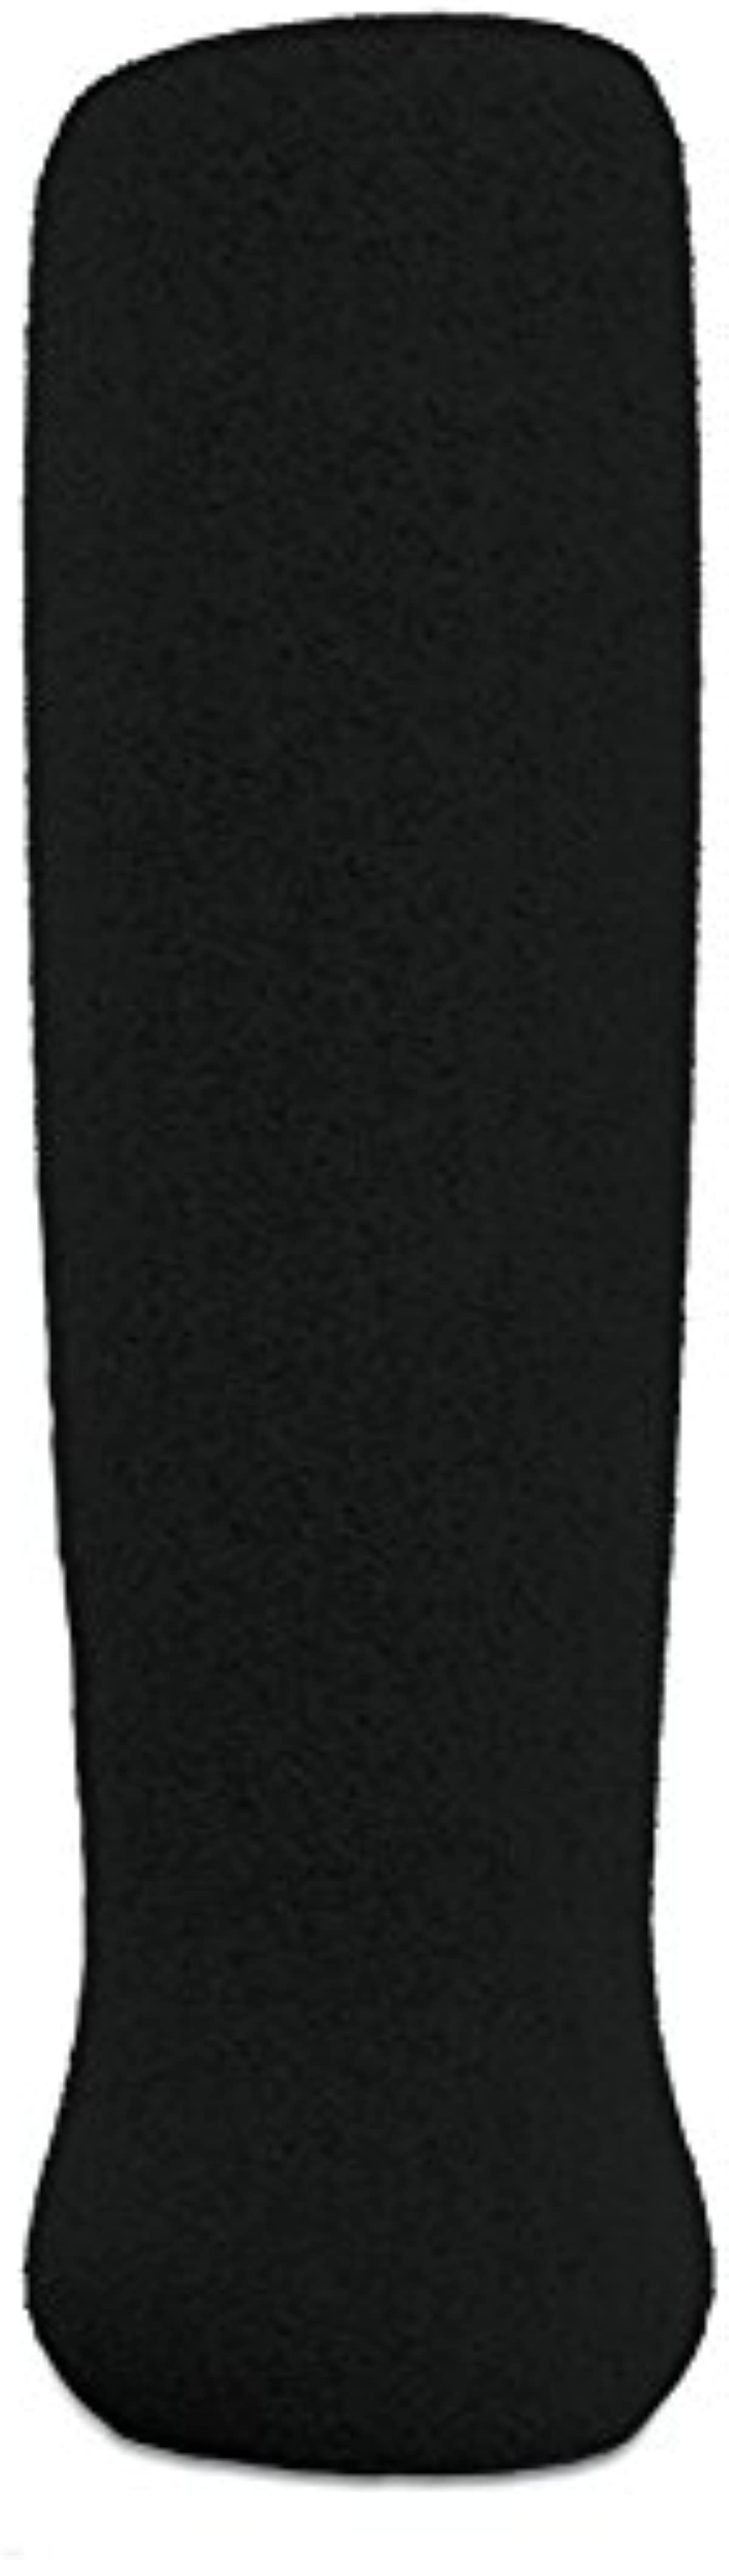 Essential Medical Supply Foam Replacement Handle for Offset Cane, Black